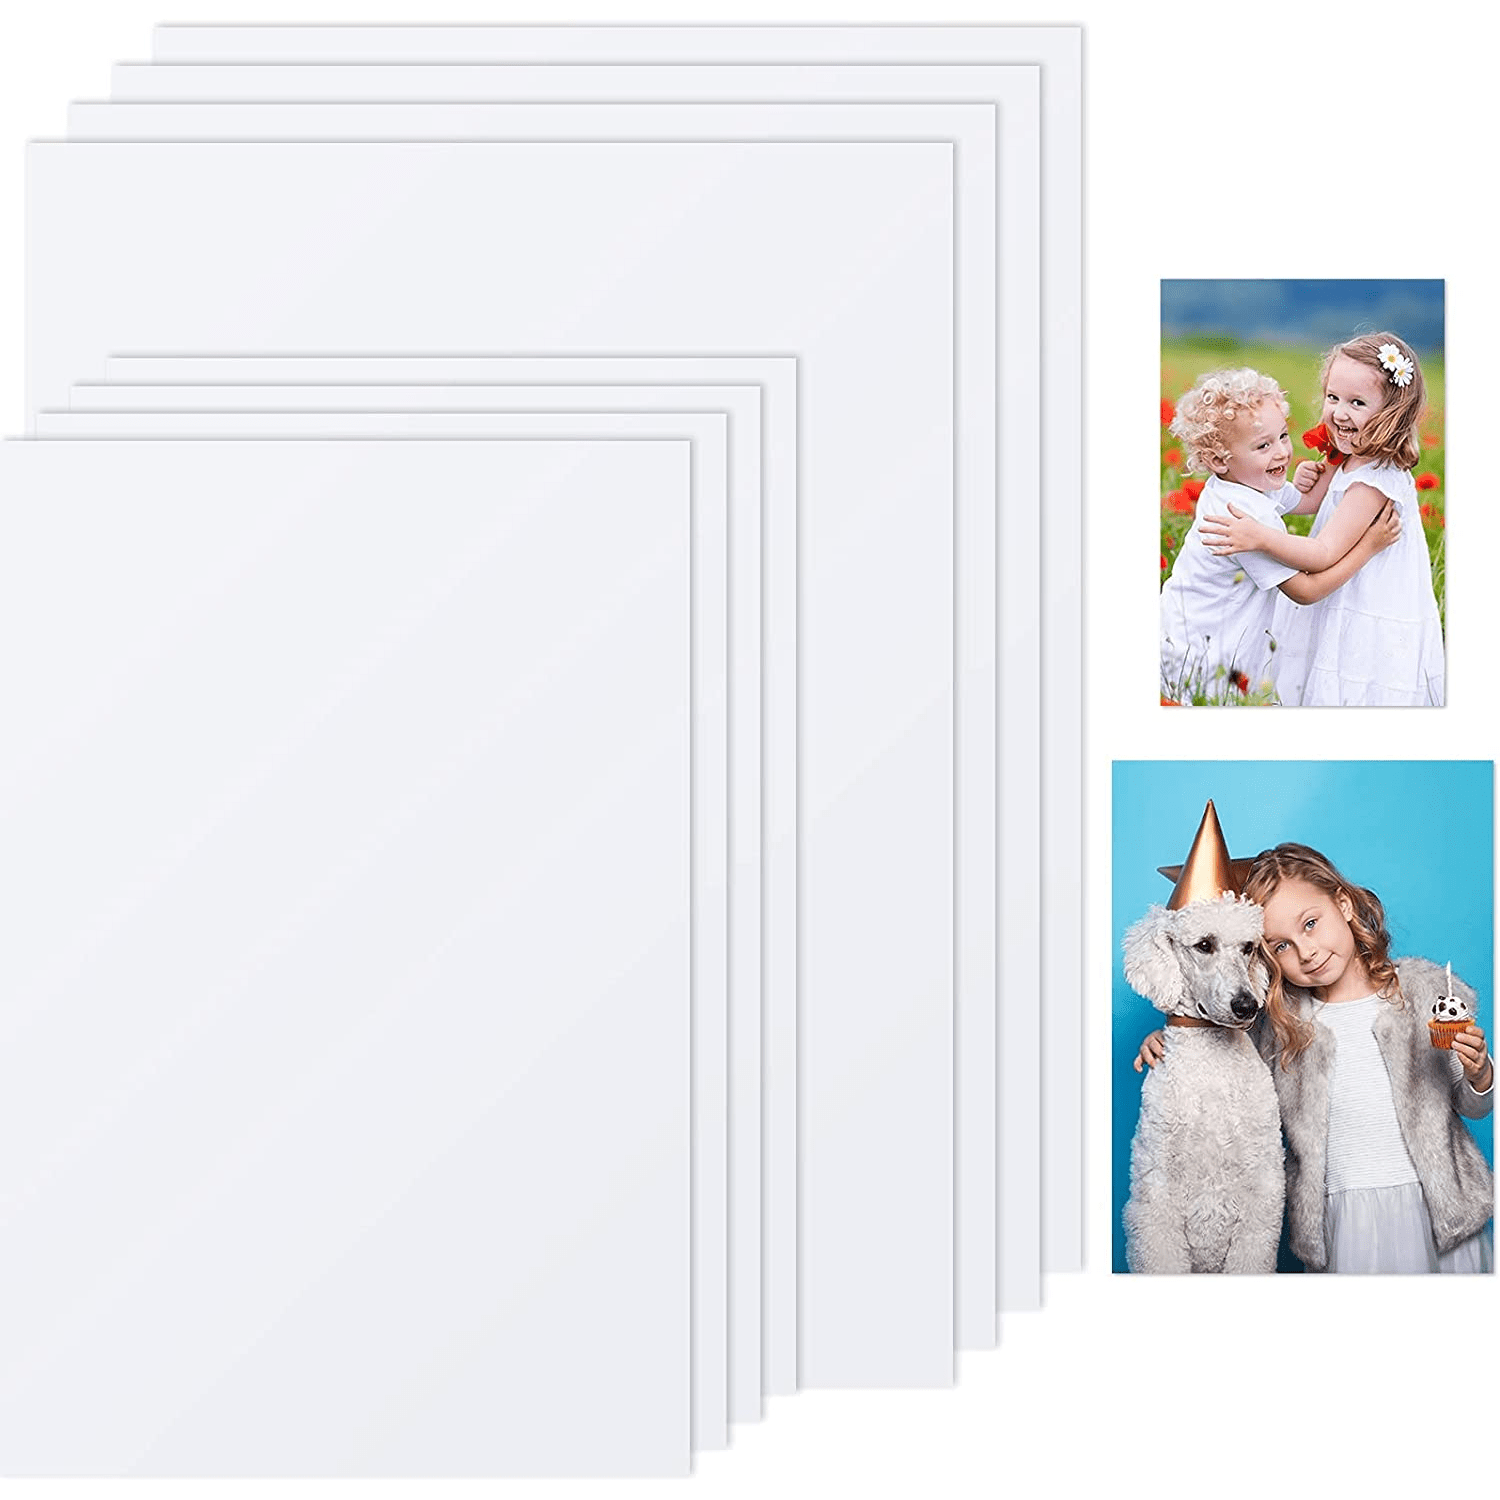  ZYNERY 10 PCS Sublimation Blanks Aluminum Sheet, 6 x 8 8 x 10  Inch Photo Metal Sheet Wall Poster Frame Sublimation Blank for Metal Sign,  Room Decor, Wall Decor : Arts, Crafts & Sewing